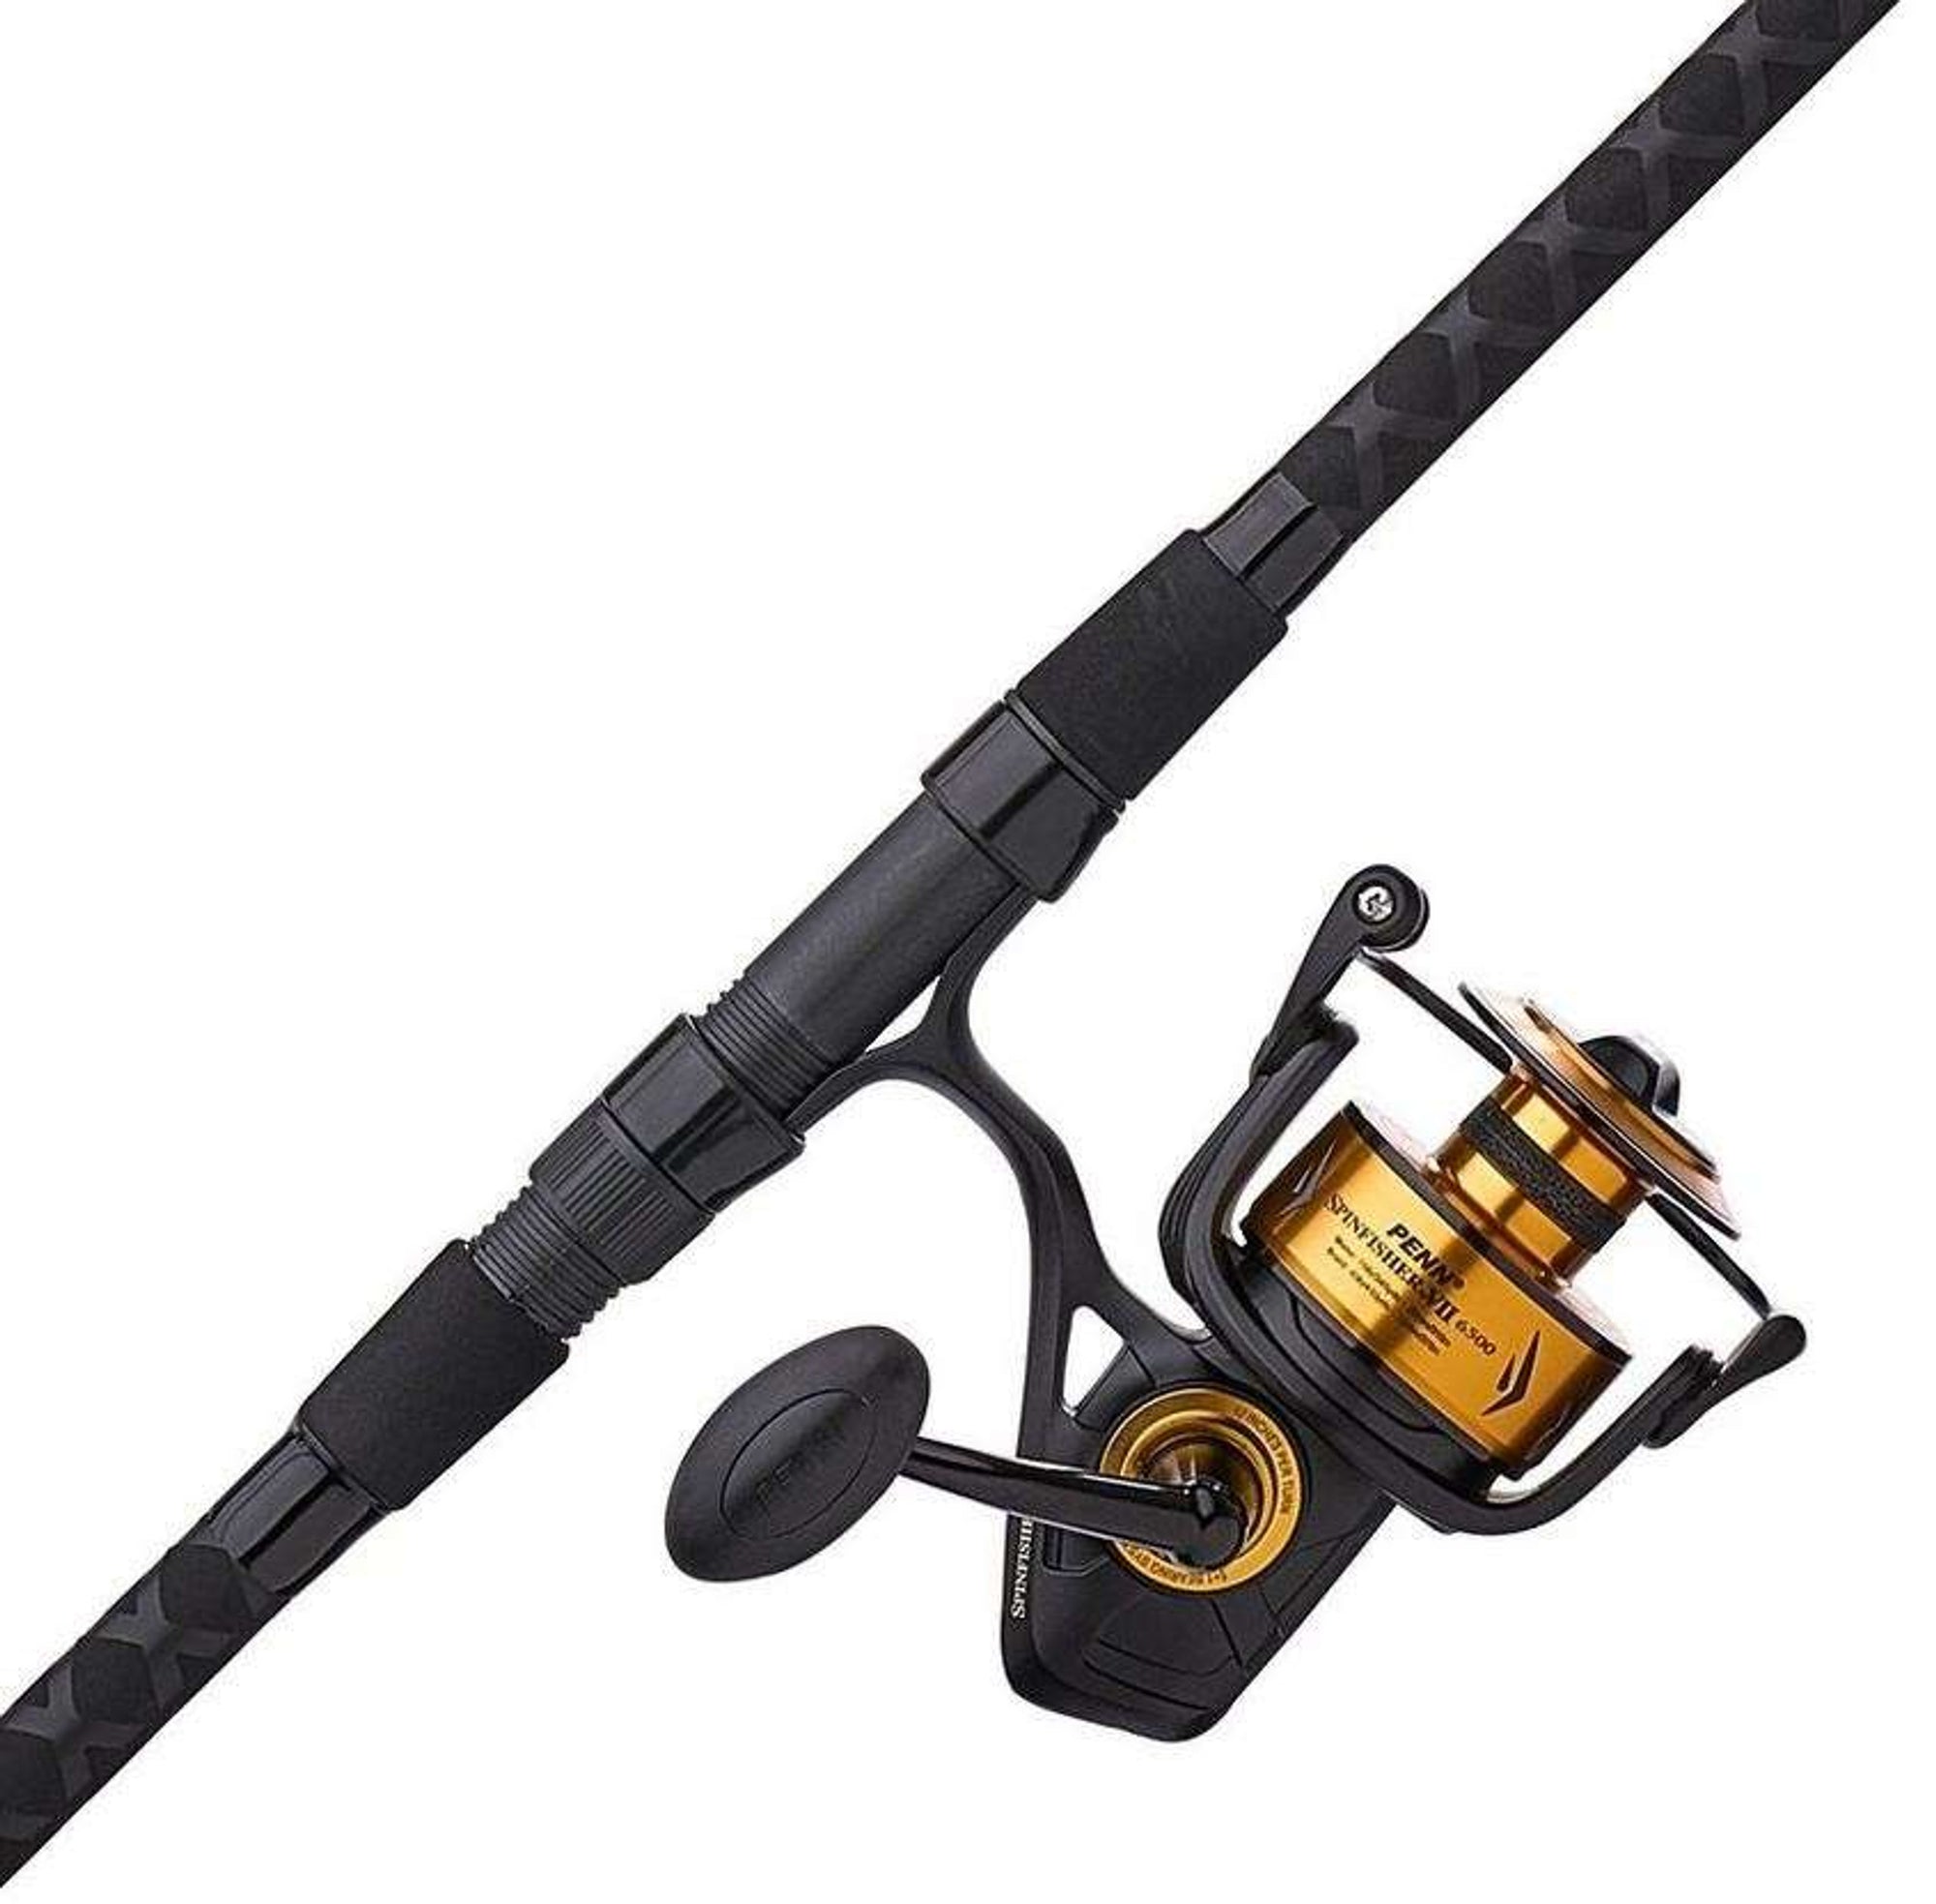 Penn Spinfisher VII Combo 6500 with 10' H 2-Piece Spin Combo - SSVII6500102H